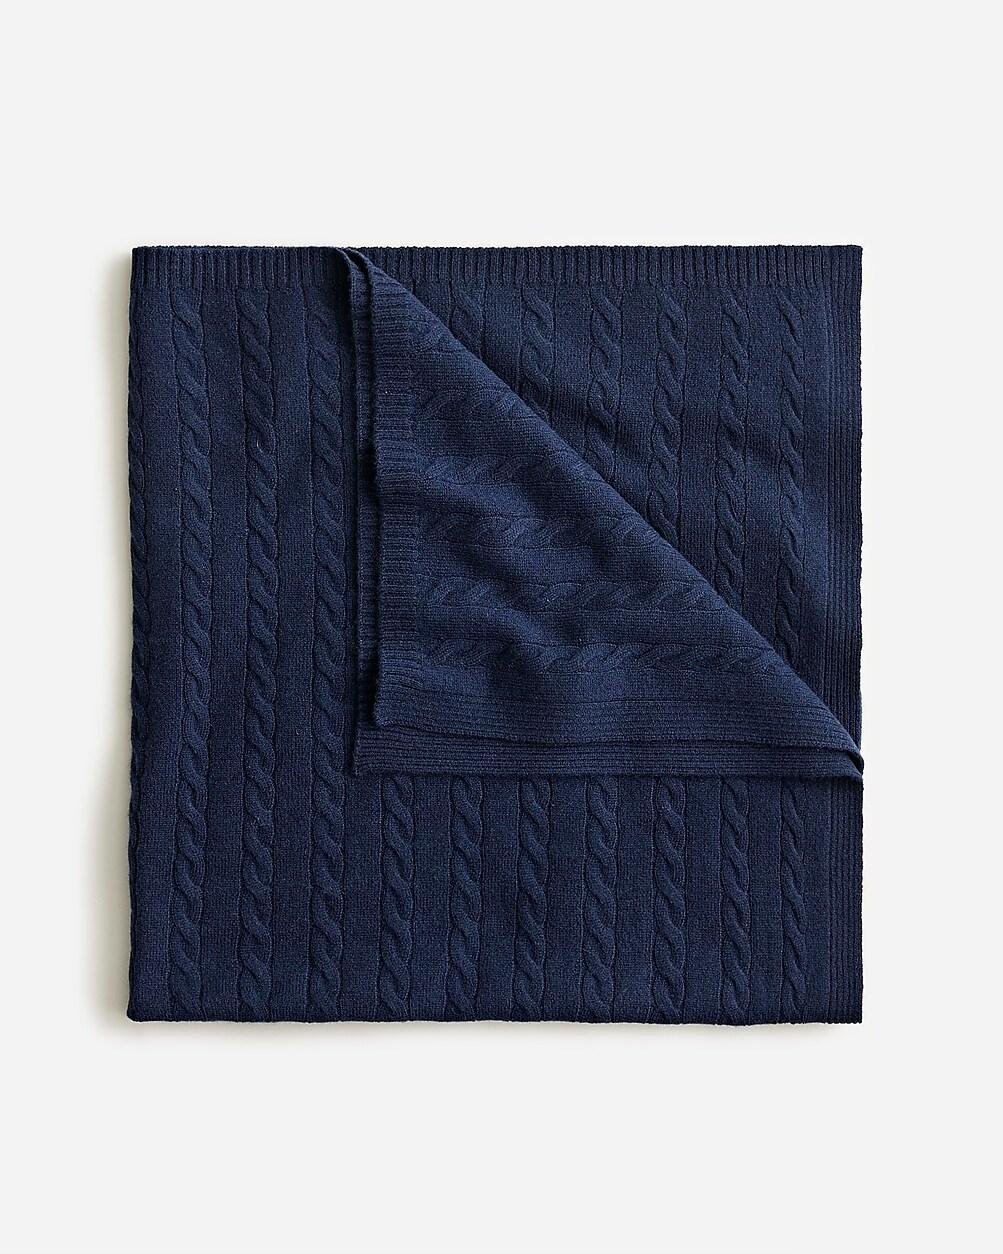 Limited-edition baby cashmere blanket by J.CREW